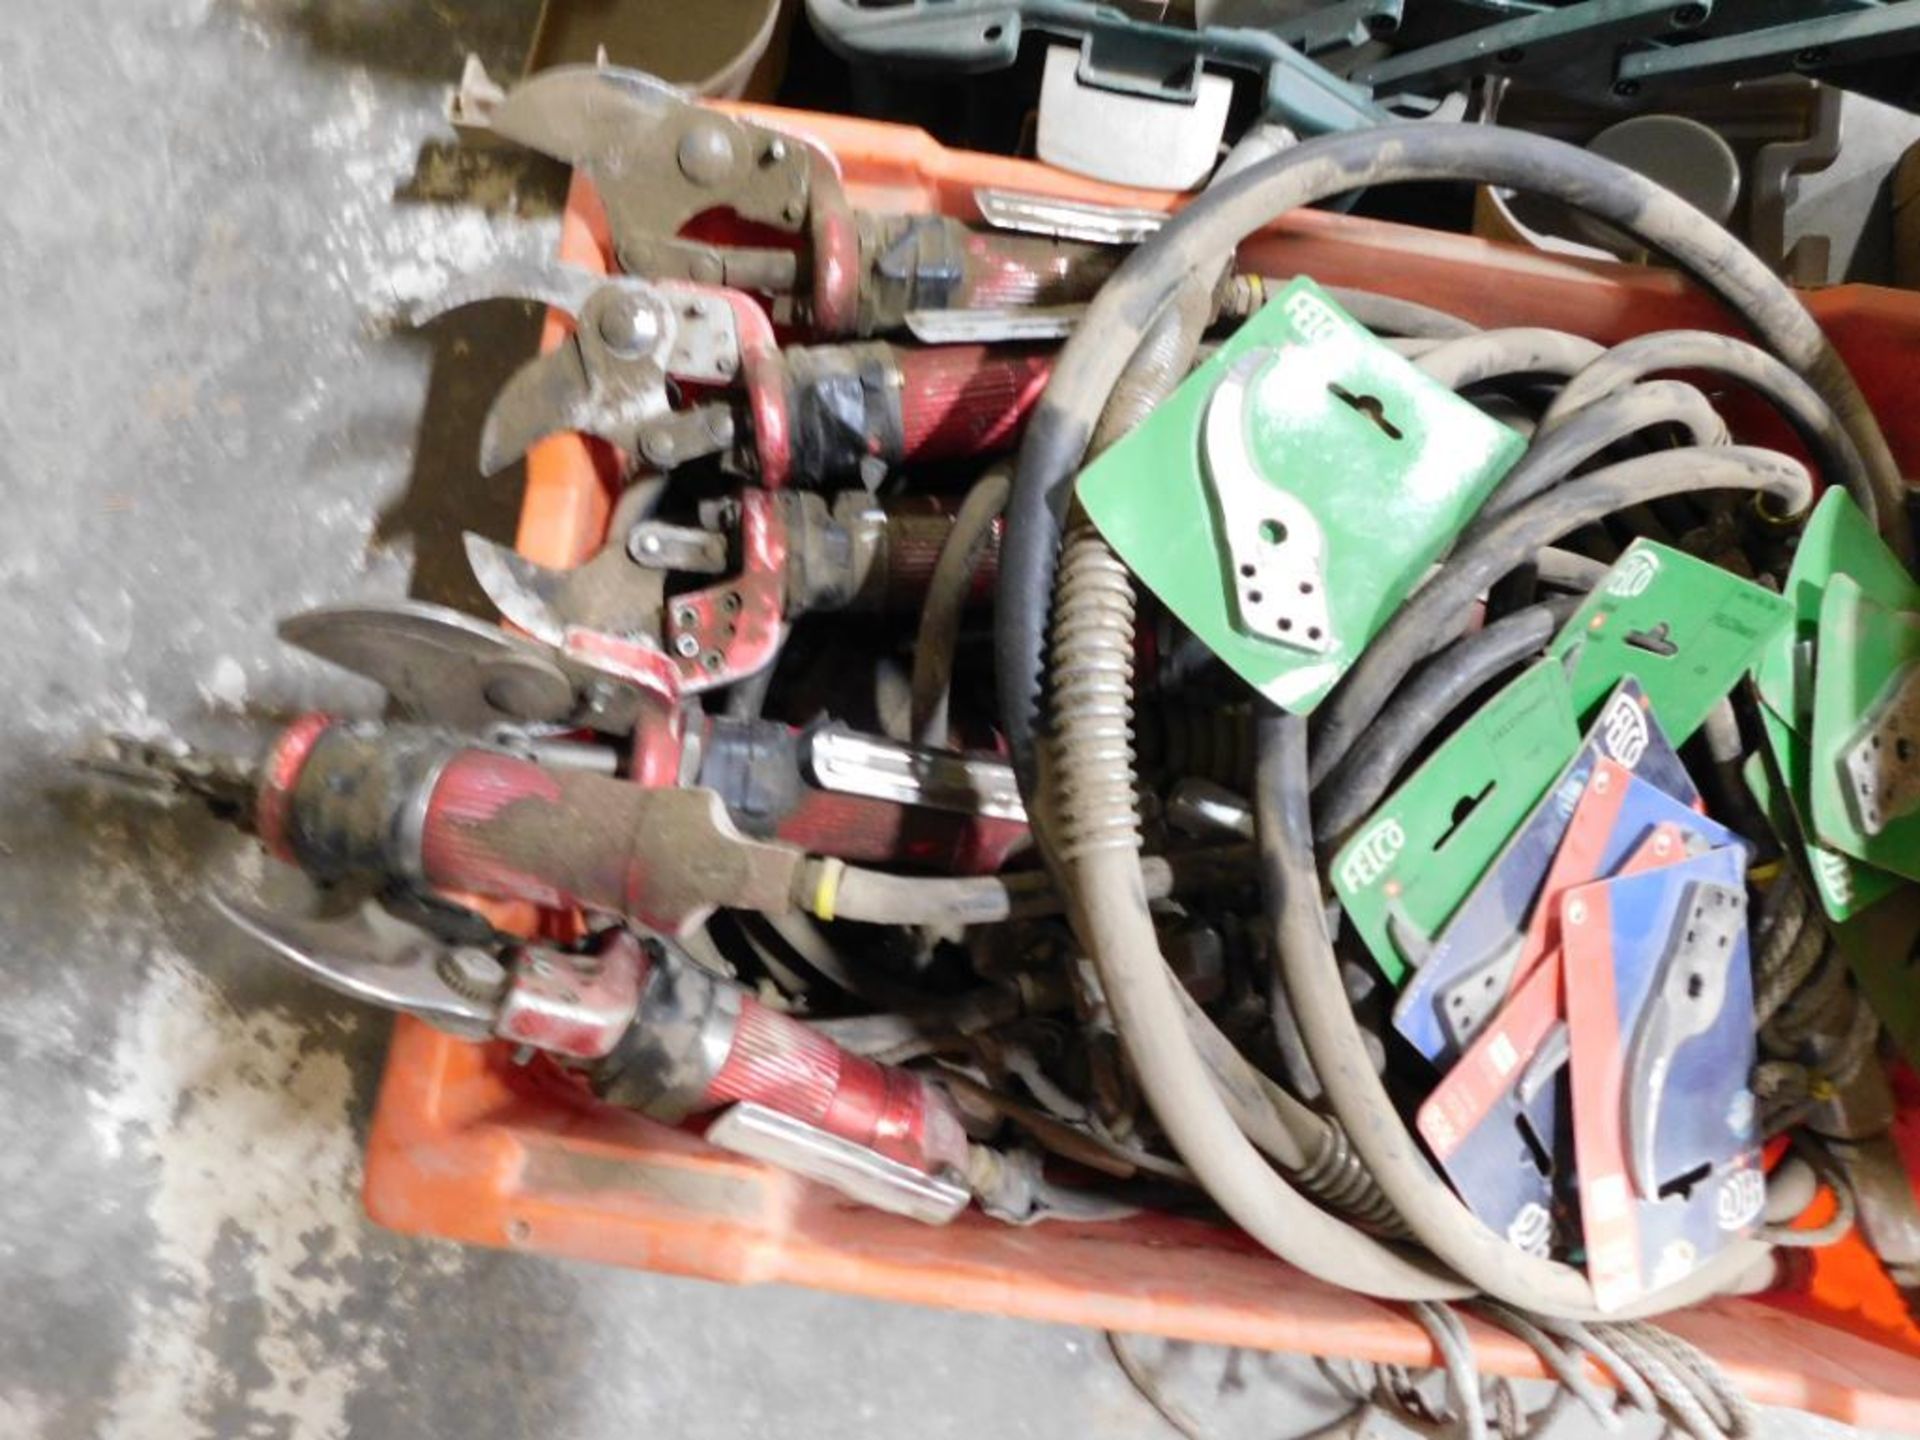 LOT: Felco Pnuematic Pruners & Replacement Parts (LOCATED IN MAINTENANCE AREA) - Image 2 of 4